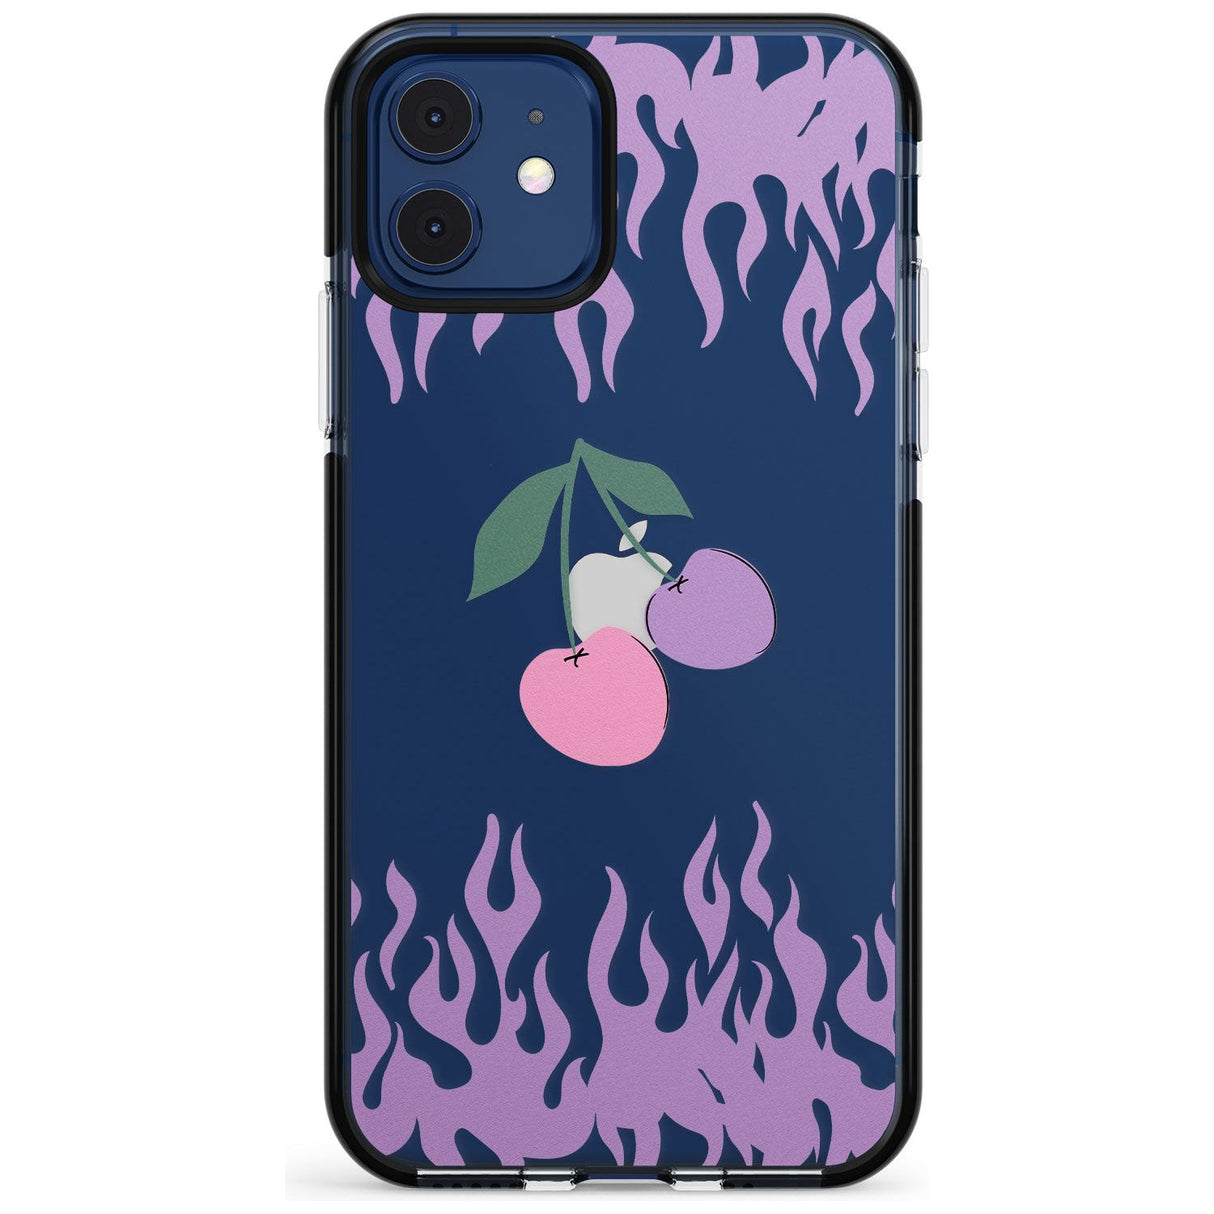 Cherries n' Flames Black Impact Phone Case for iPhone 11 Pro Max